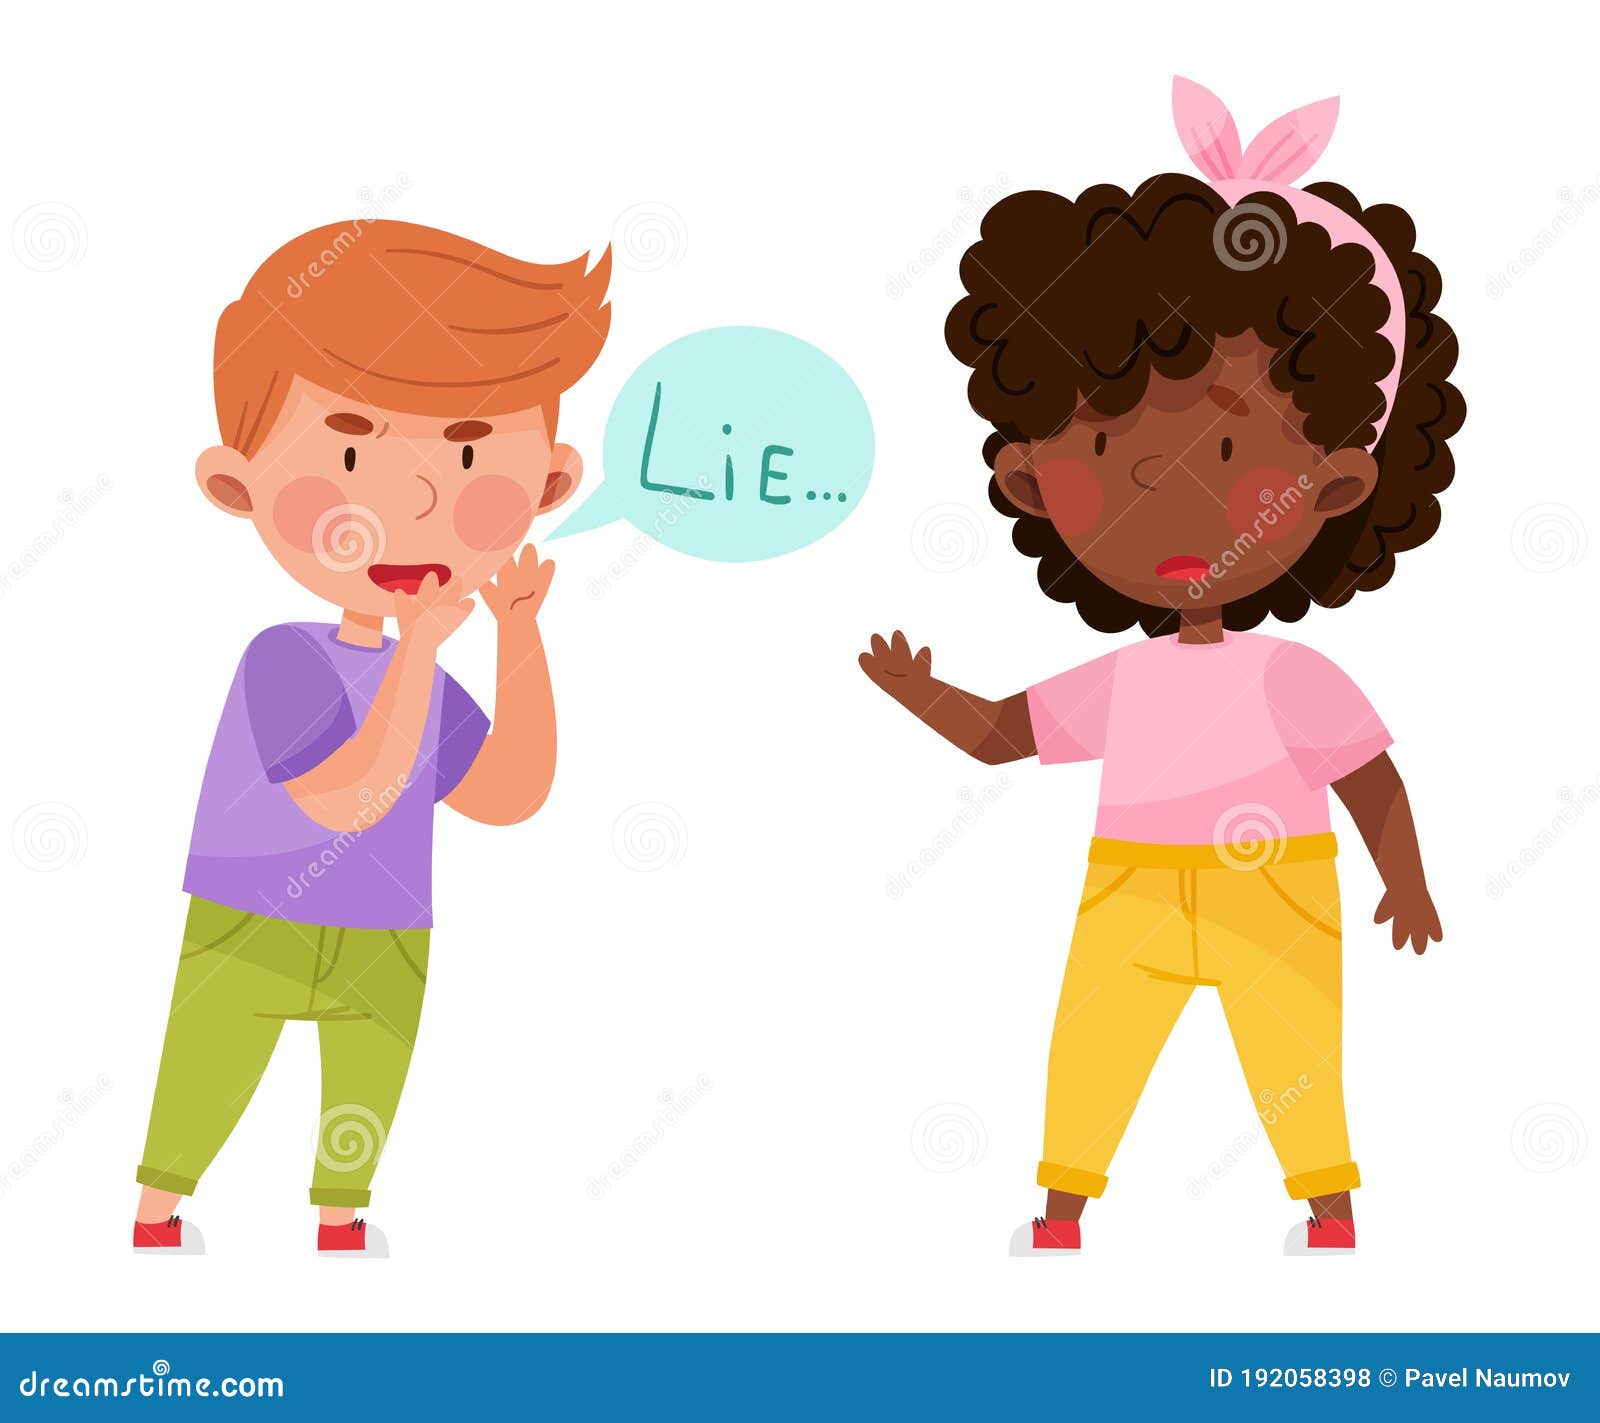 little boy telling lie to his agemate girl  